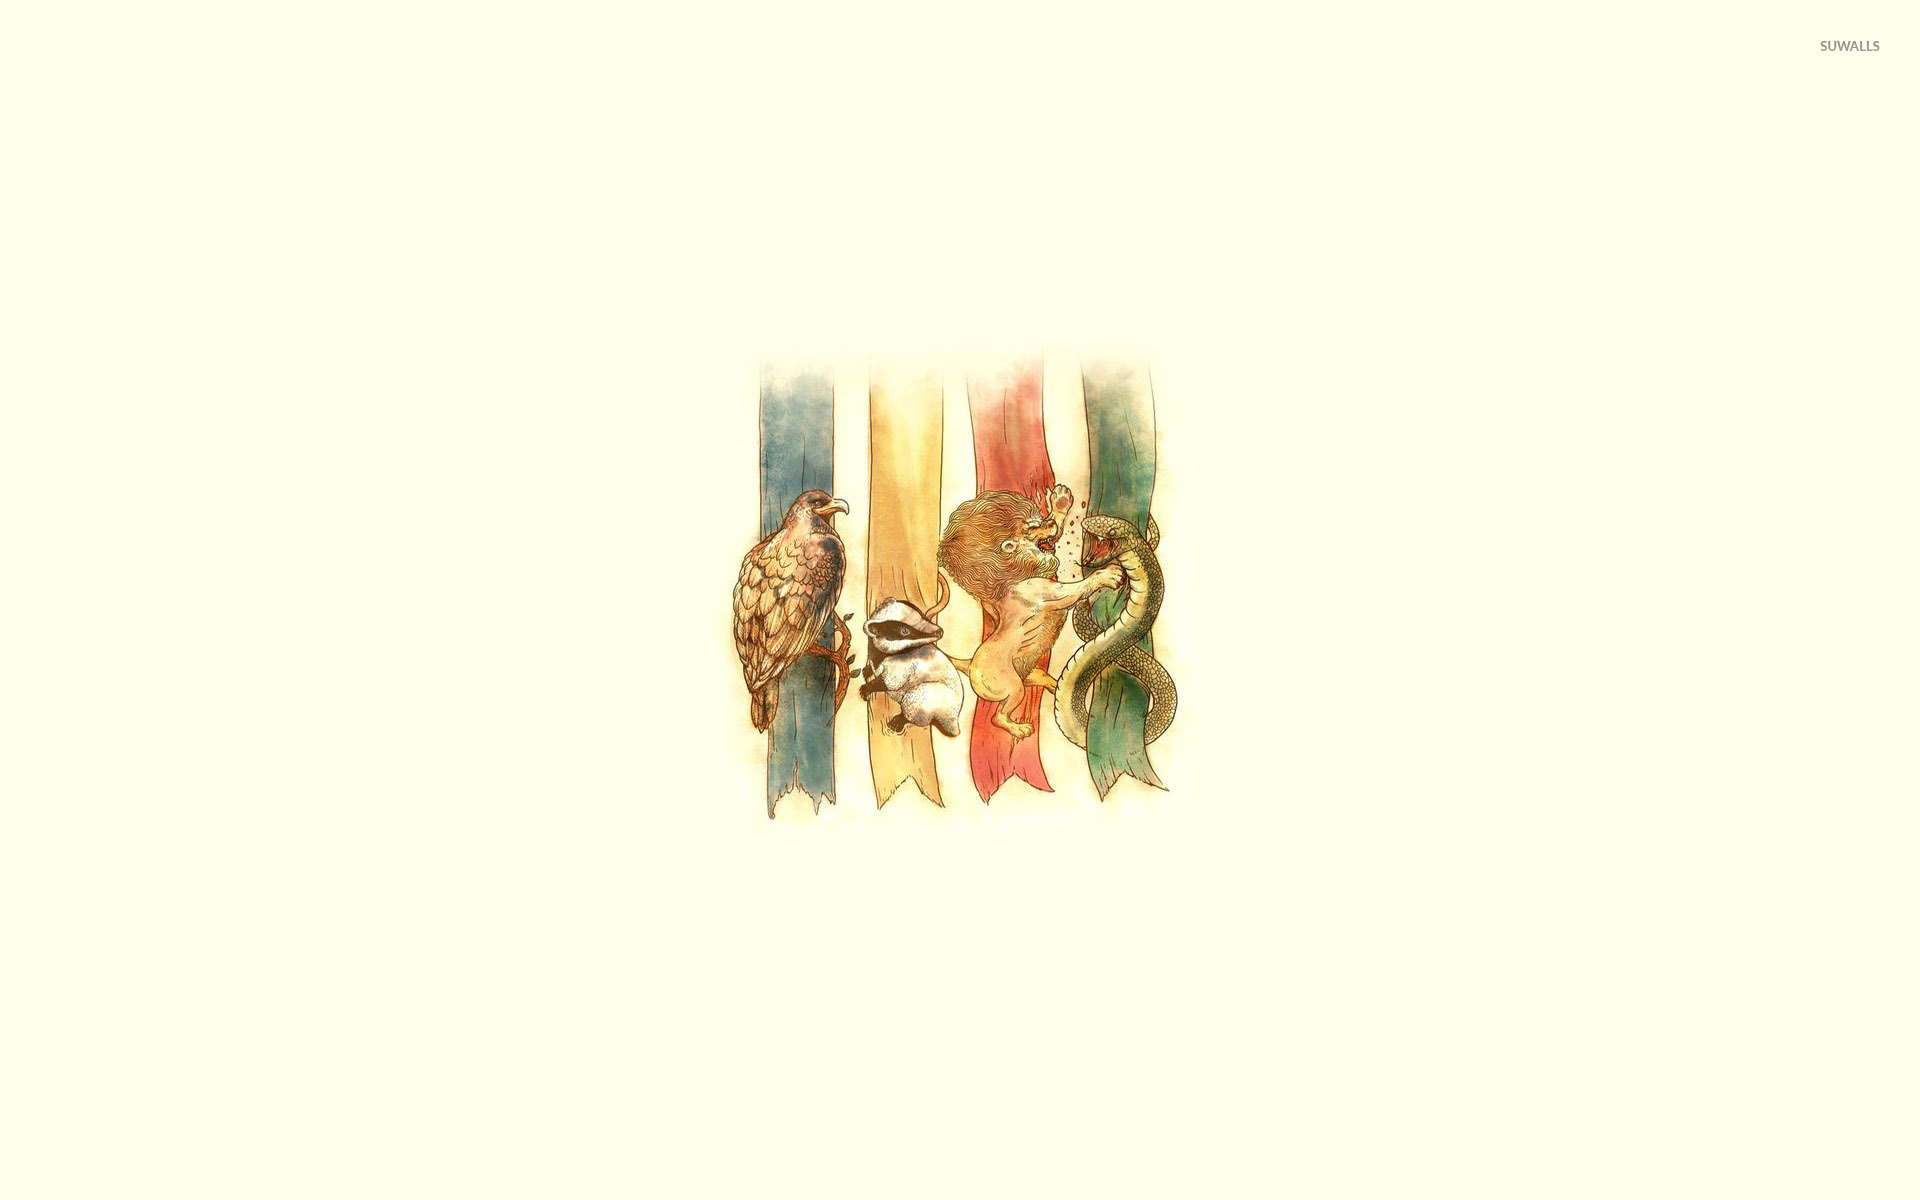 Ravenclaw Quidditch Wallpapers